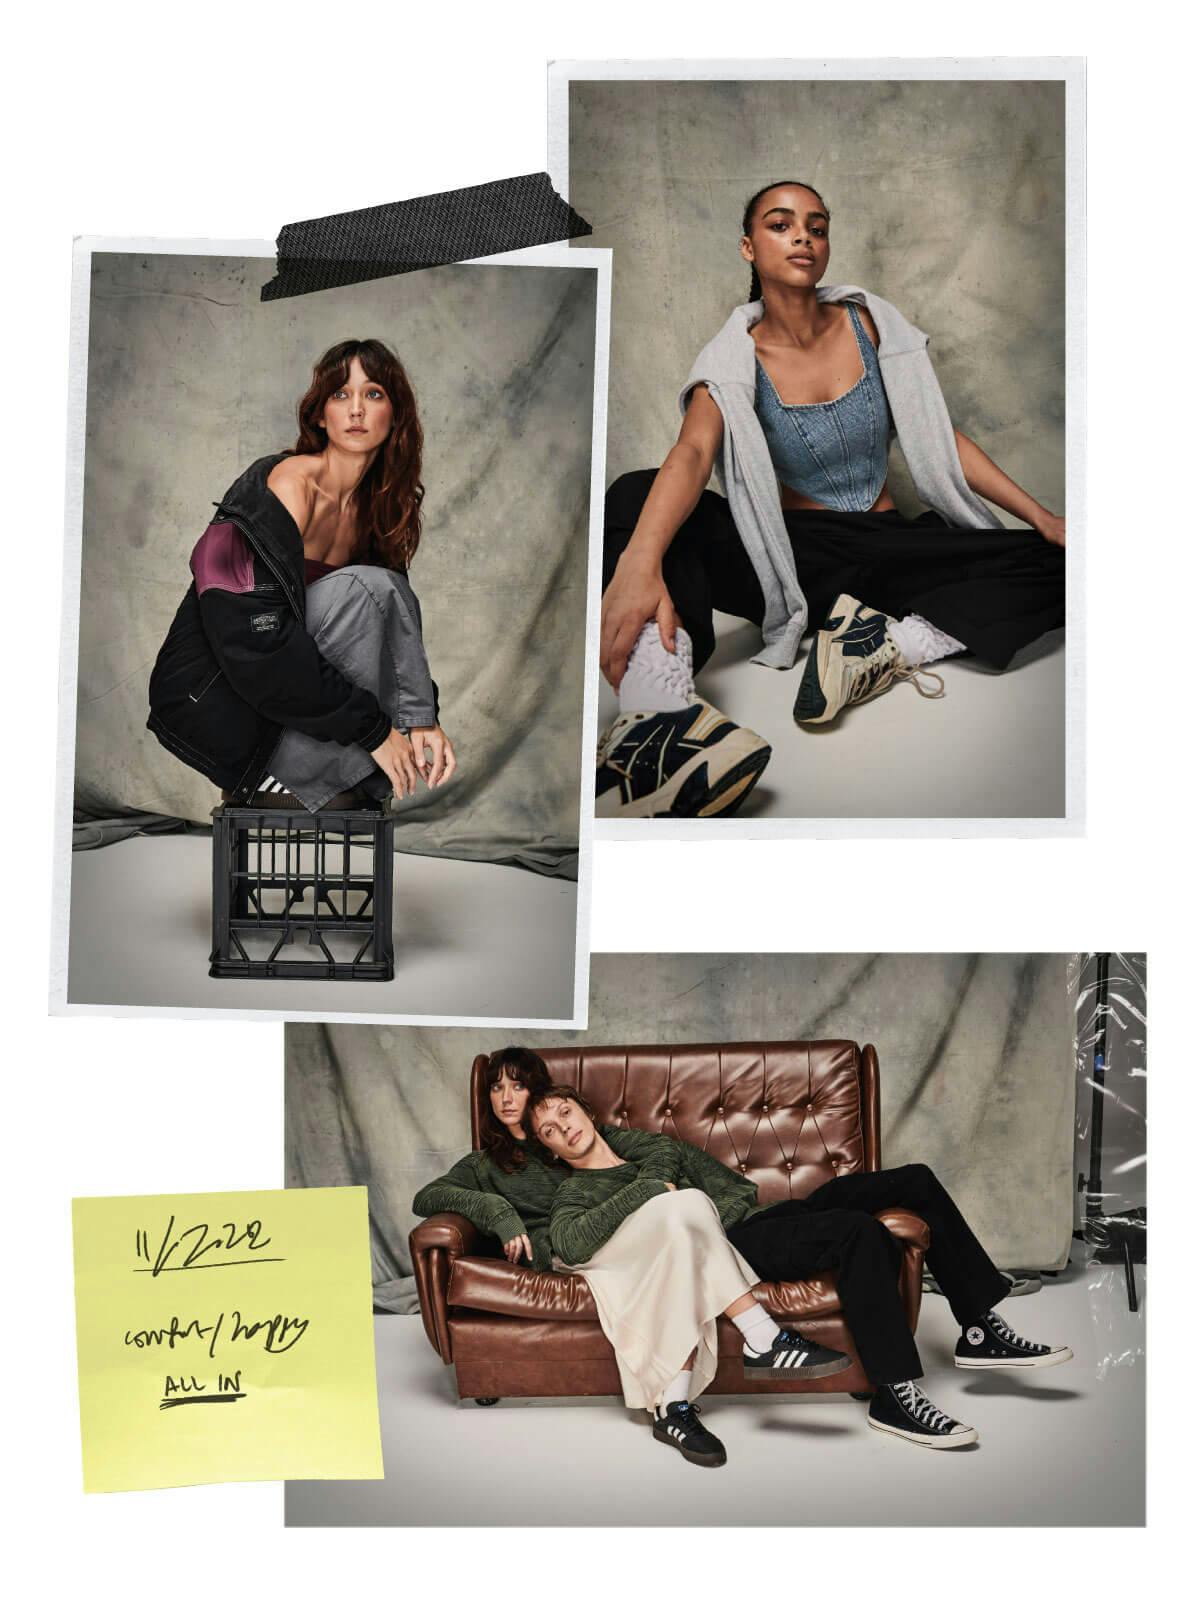 Collage layout of images. Top right image is in a white frame and wears black track pants, a denim corset with a grey crew over her shoulders. Image top left in a white frame is model squatting on a black milk crate, she is wearing a grey maxi cargo skirt and a black spray jacket with purple panel. Landscape image at the bottom features a male and female model lounged on a brown leather couch, they are both wearing the same green knit, the female with a slip dress and the male with black jeans. A yellow post it note with hand written text overlaps the image